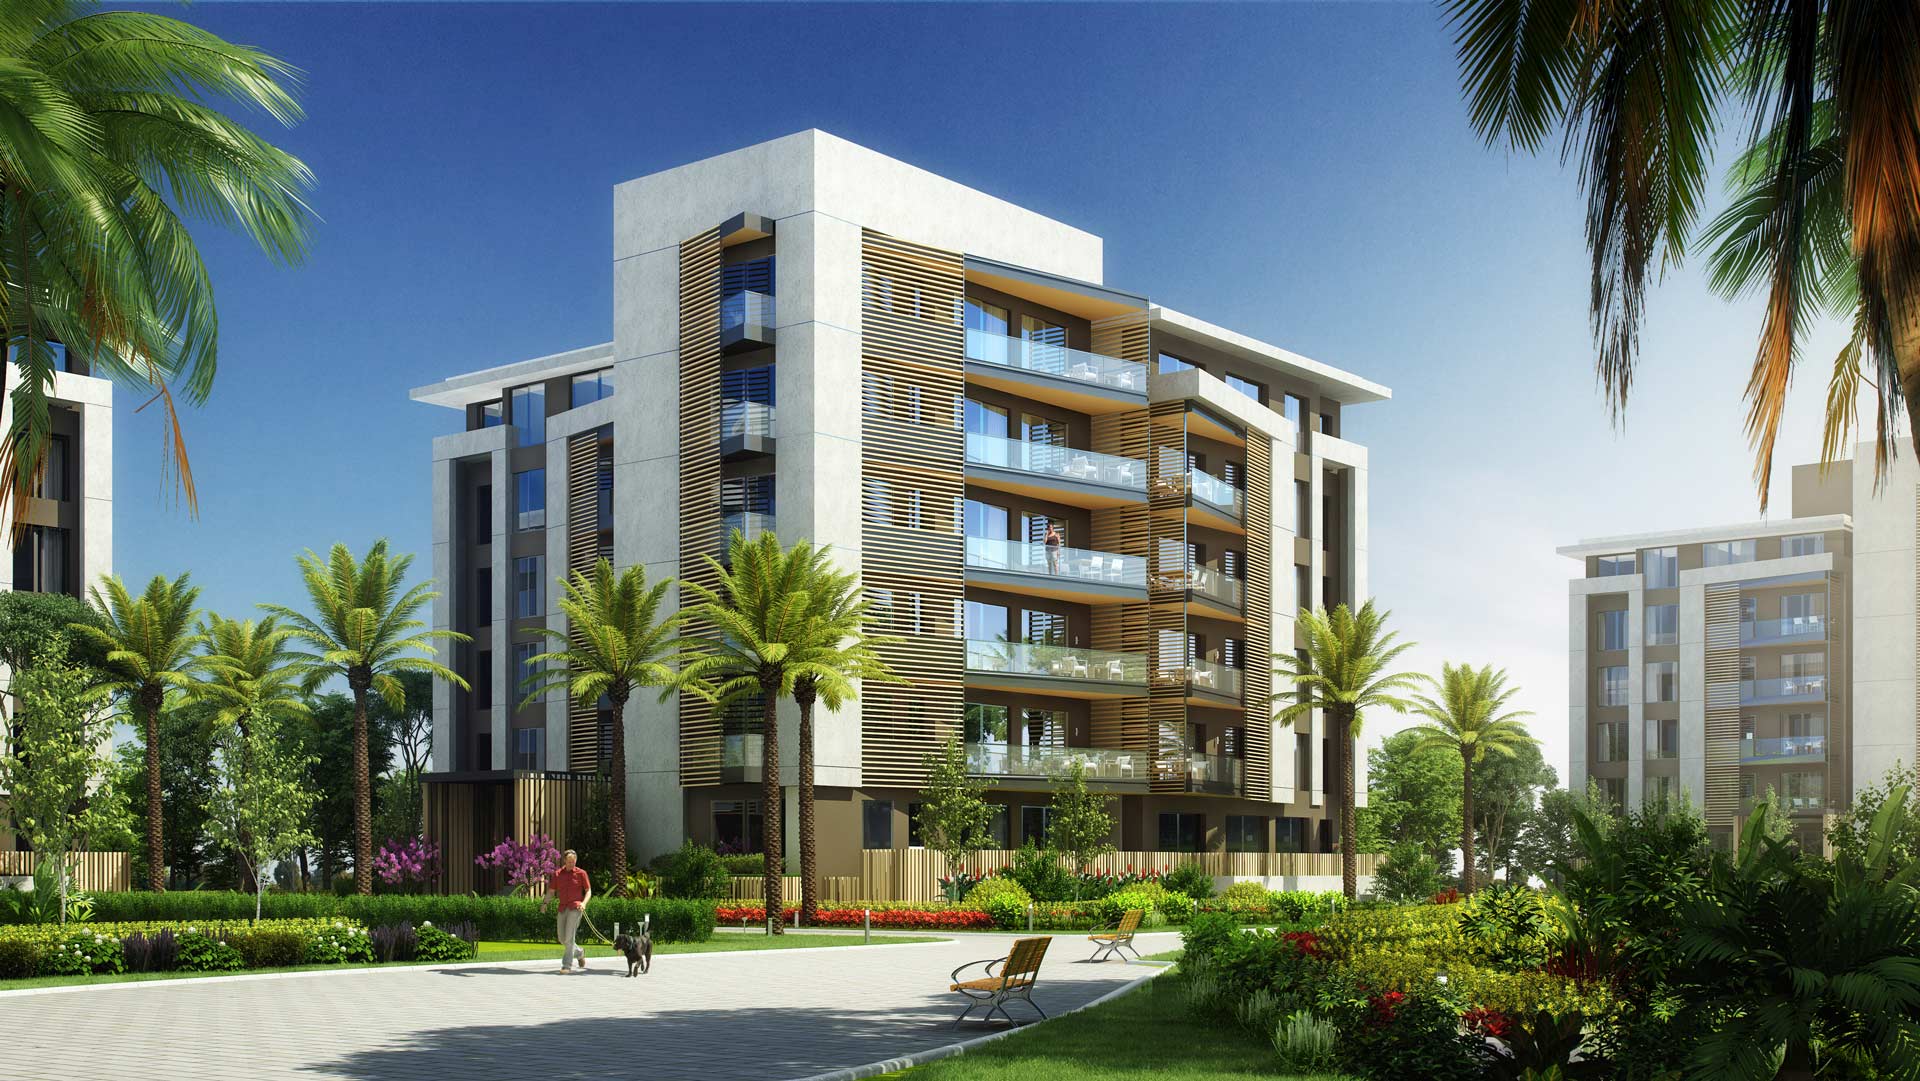 In New Cairo, book your apartment in Privado project with an area of 150 meters